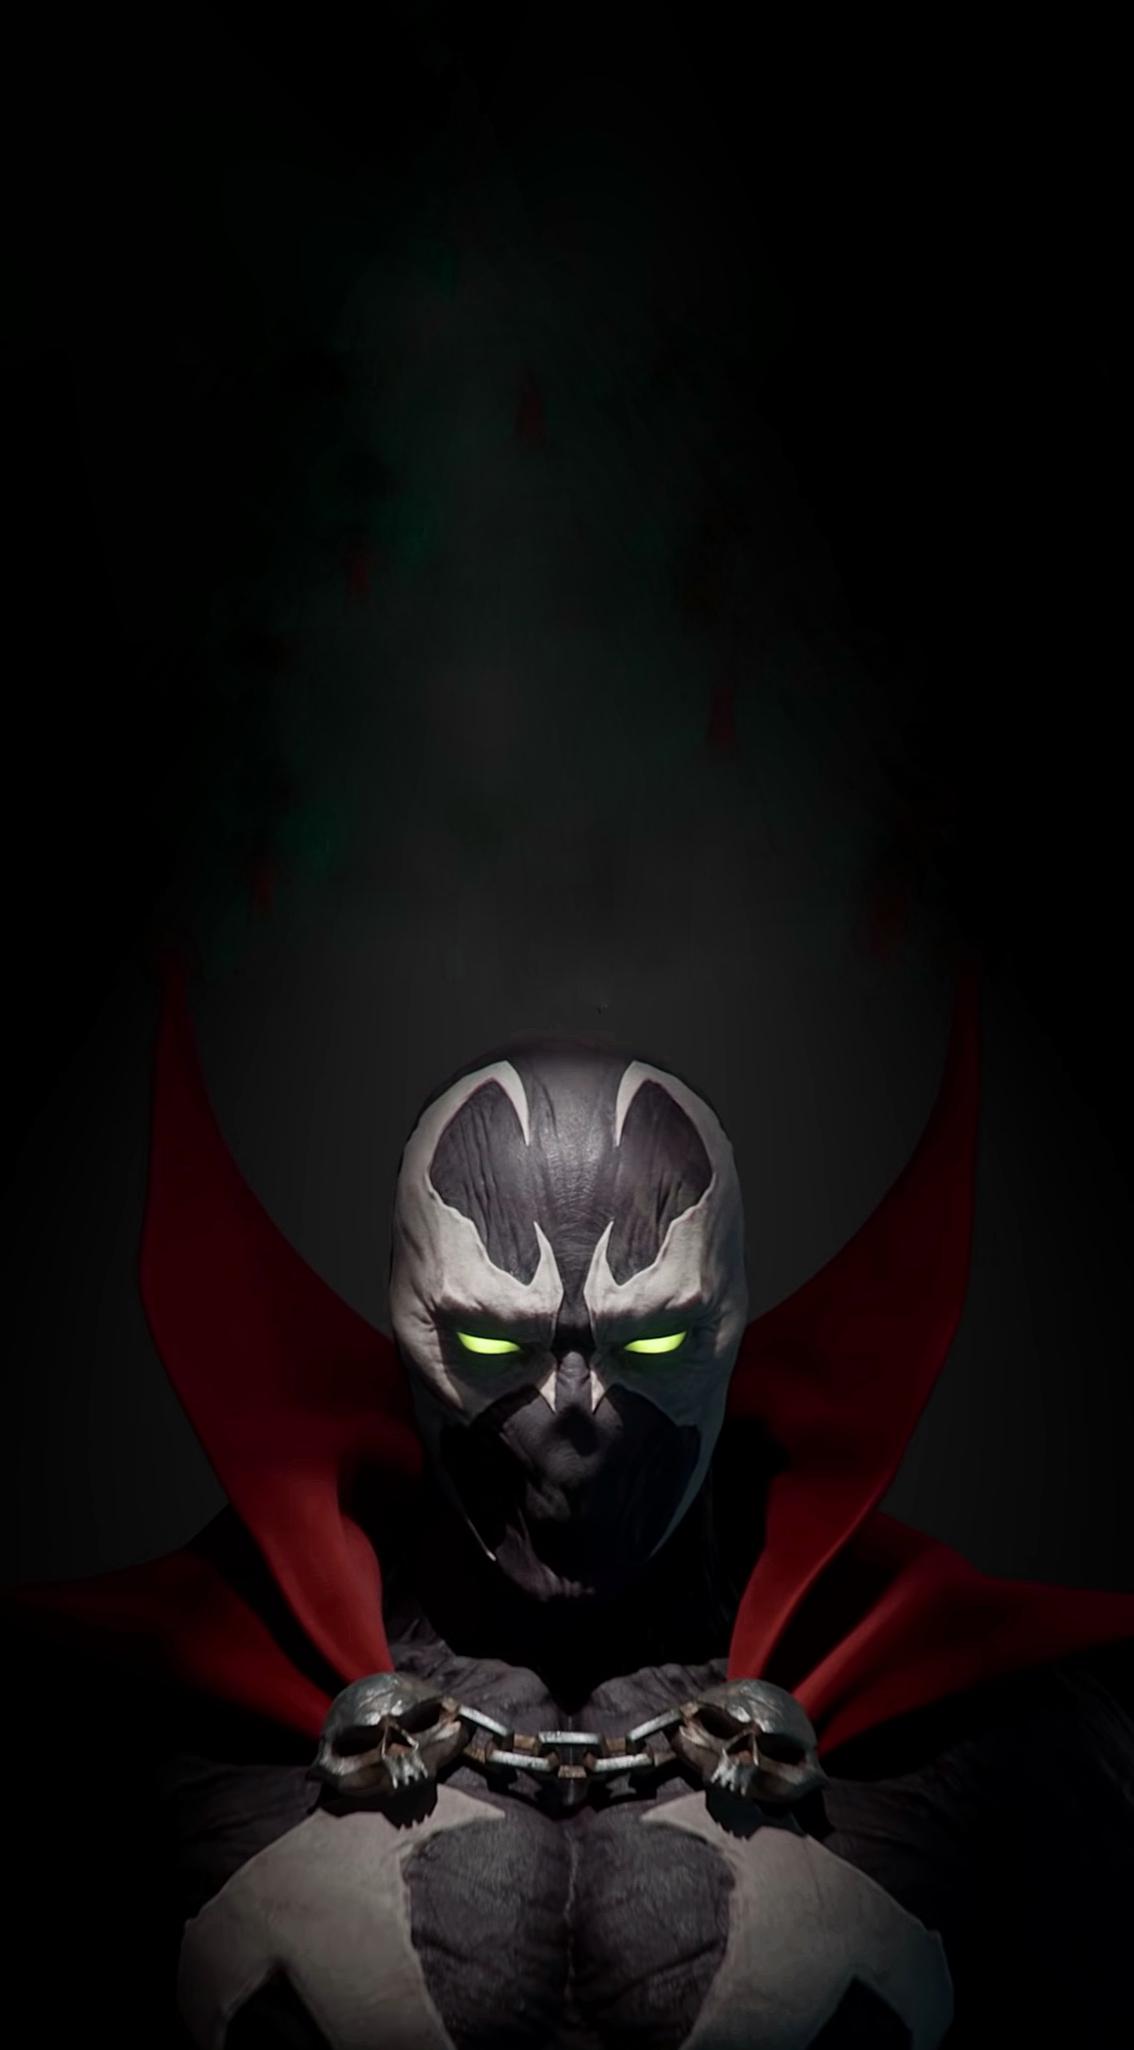 A Spawn wallpaper that will fit most phone screens